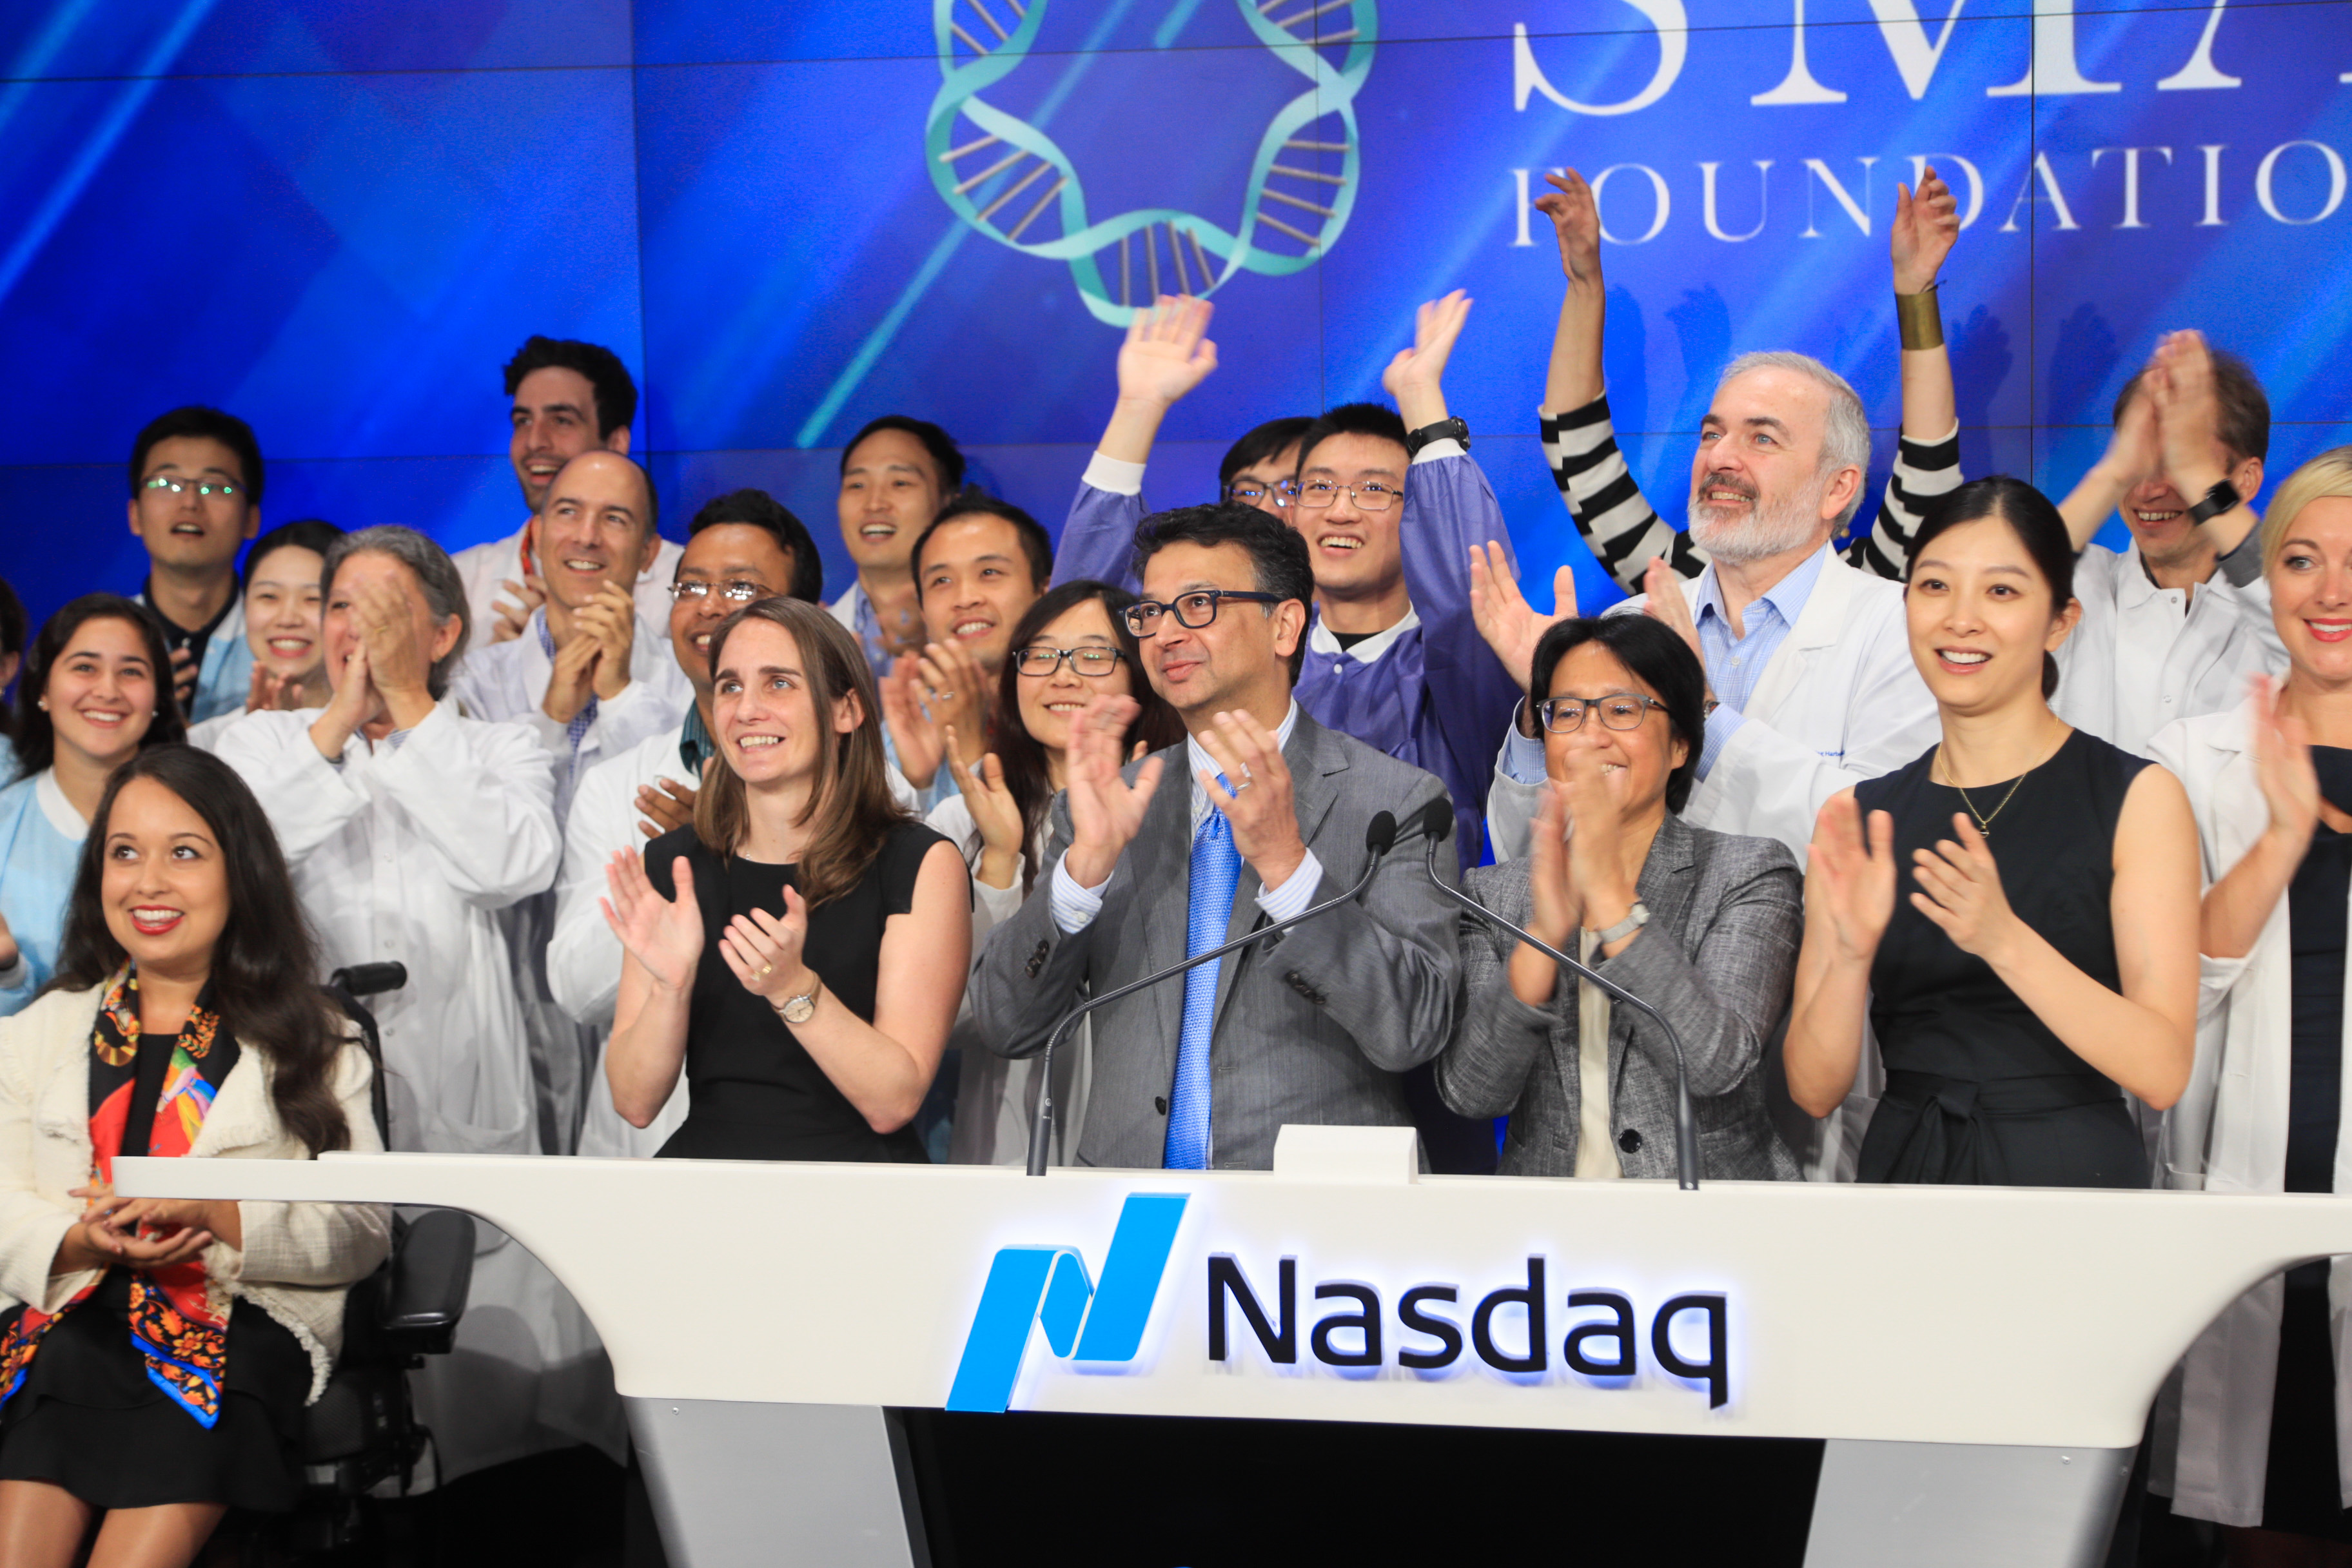 The Spinal Muscular Atrophy Foundation rings Nasdaq opening bell